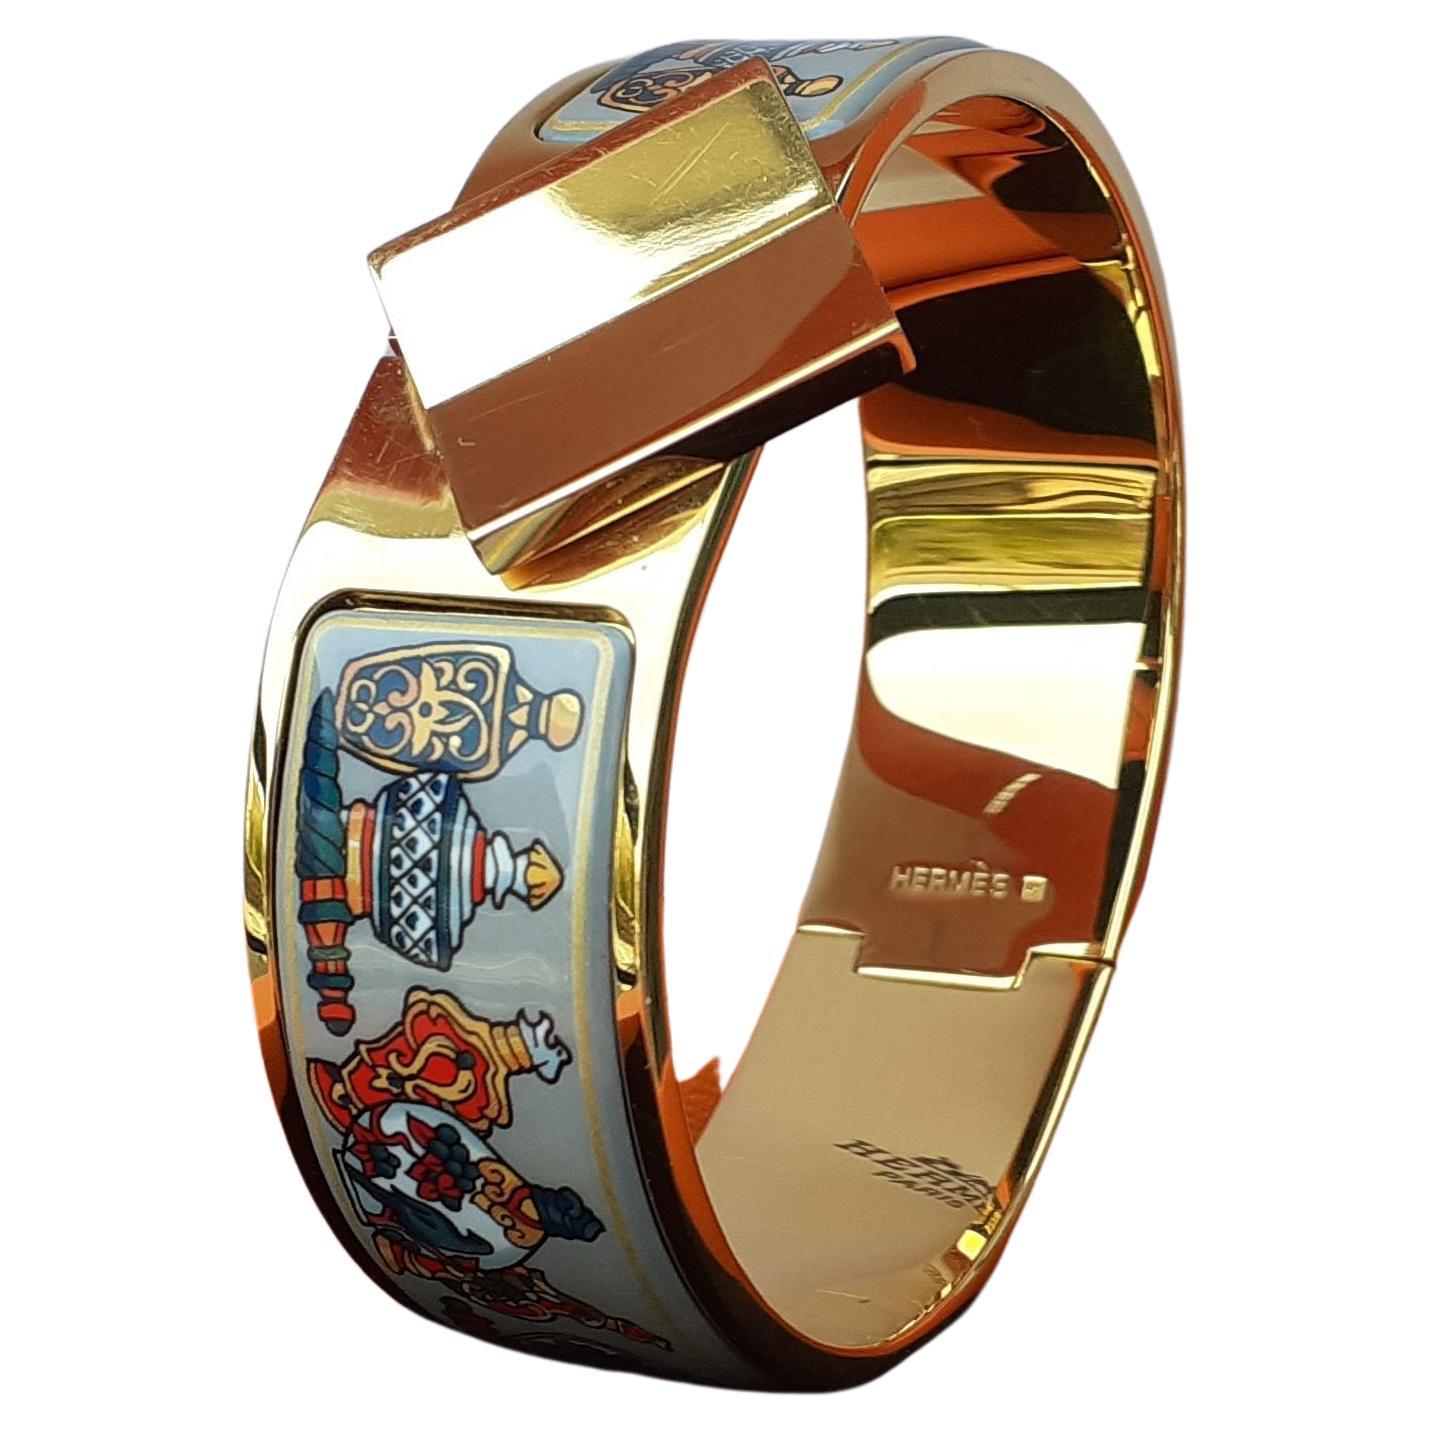 Gorgeous Authentic Hermès Bracelet

A timeless stunning item, a must-have, super chic and so so so beautiful !

Print: Perfume Bottles

From the 